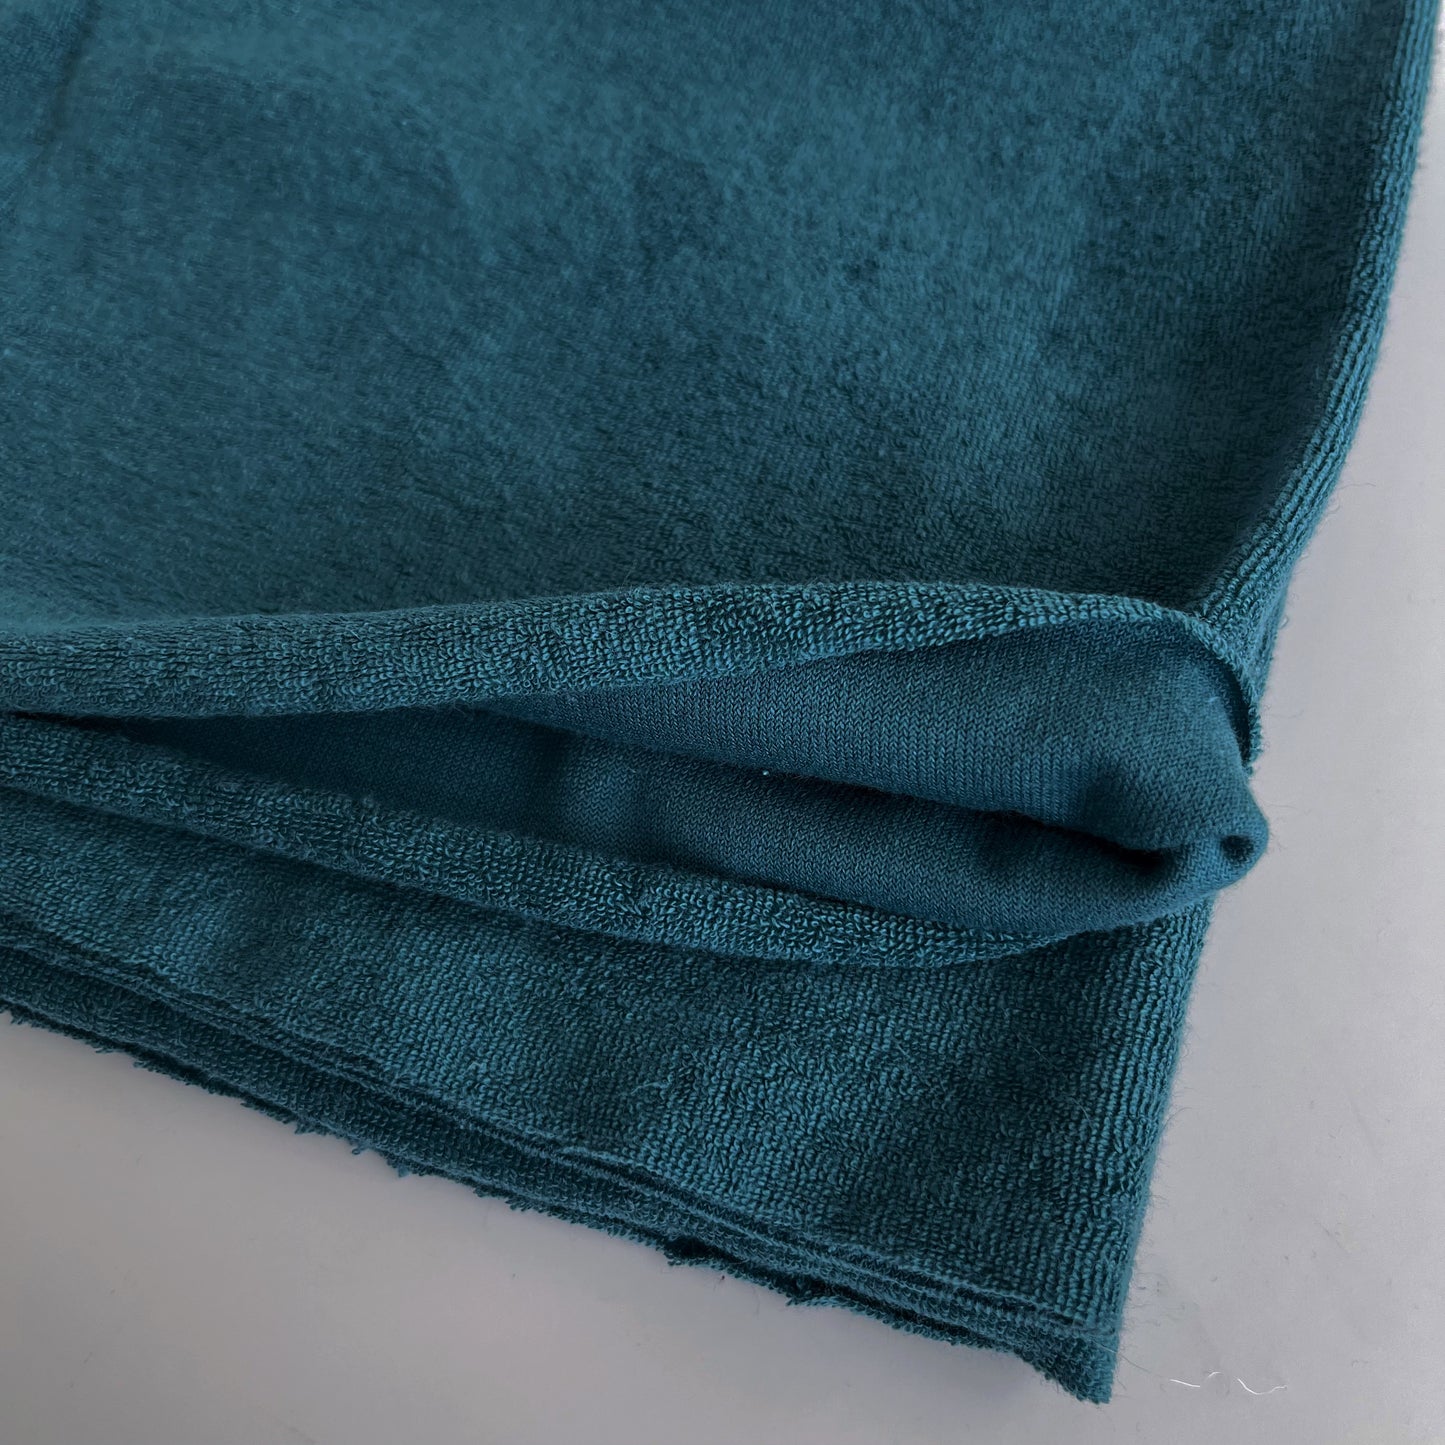 Euro Toweling | Petrol | Towel French Terry "Sponge" | BY THE HALF YARD